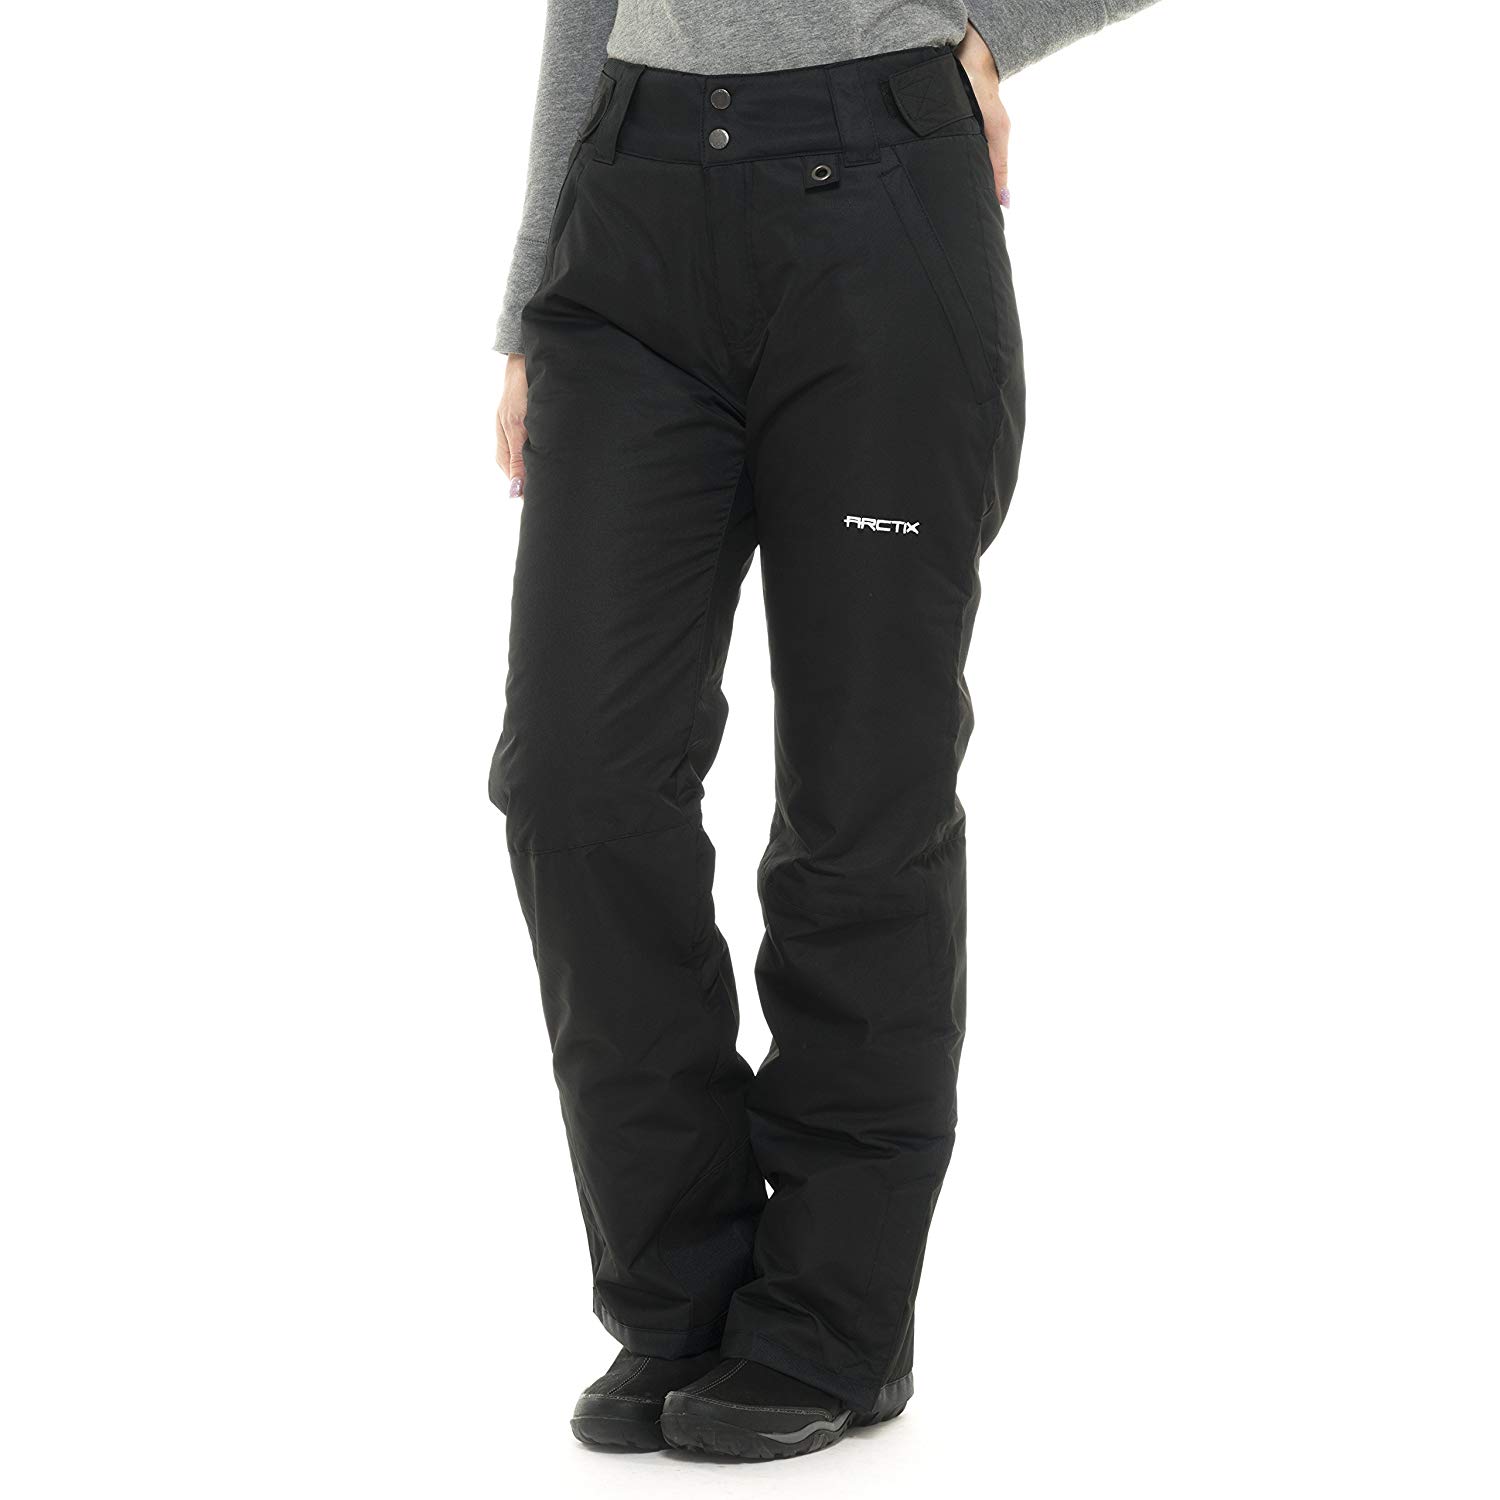 NEW Arctix Women's Snow Sports Insulated Pants, White XS X-Small